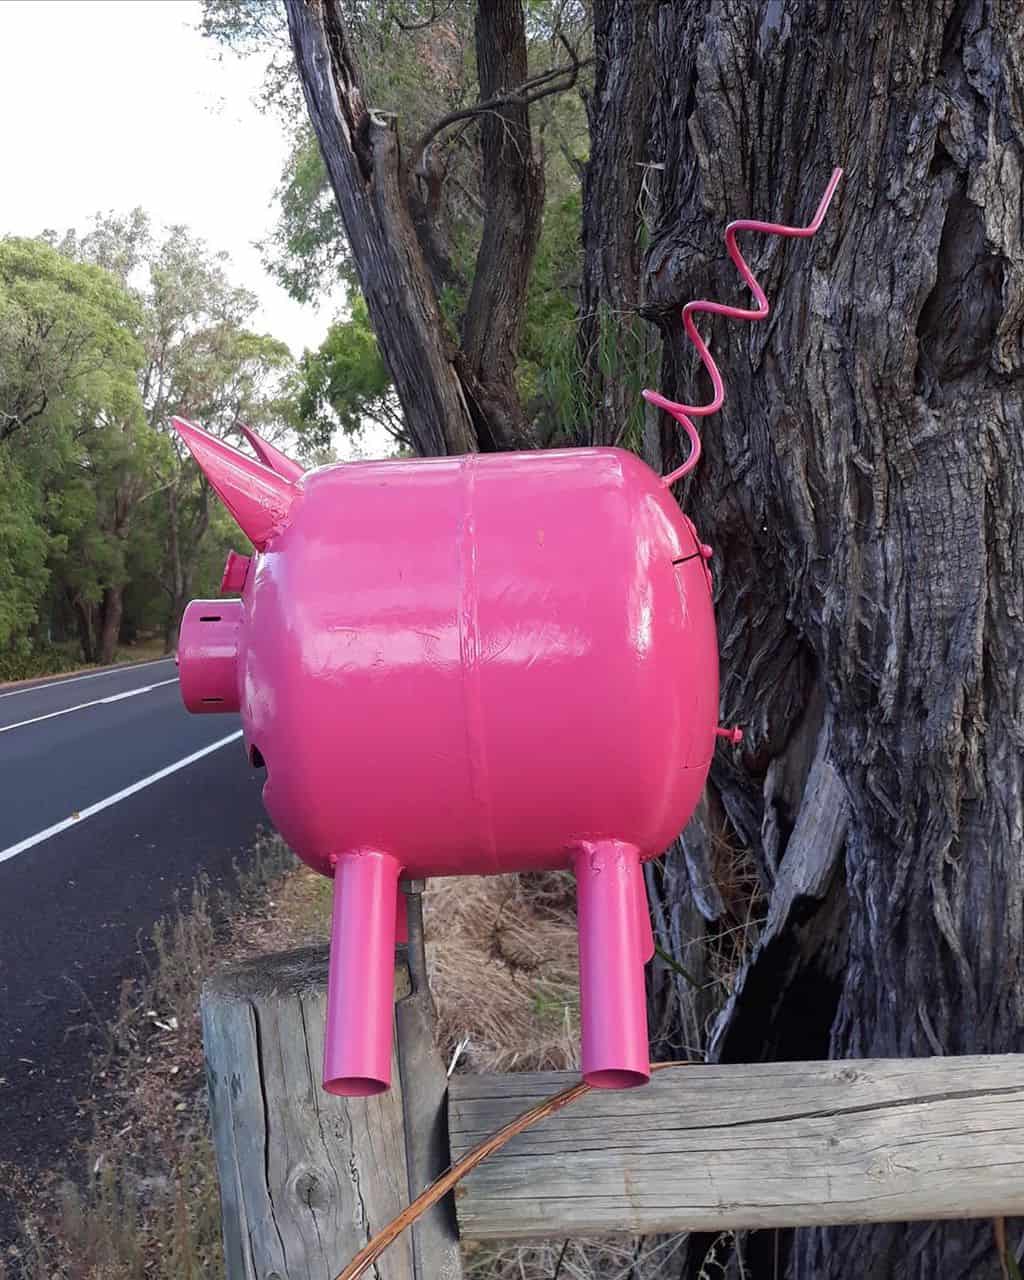 Very pink pig letterbox